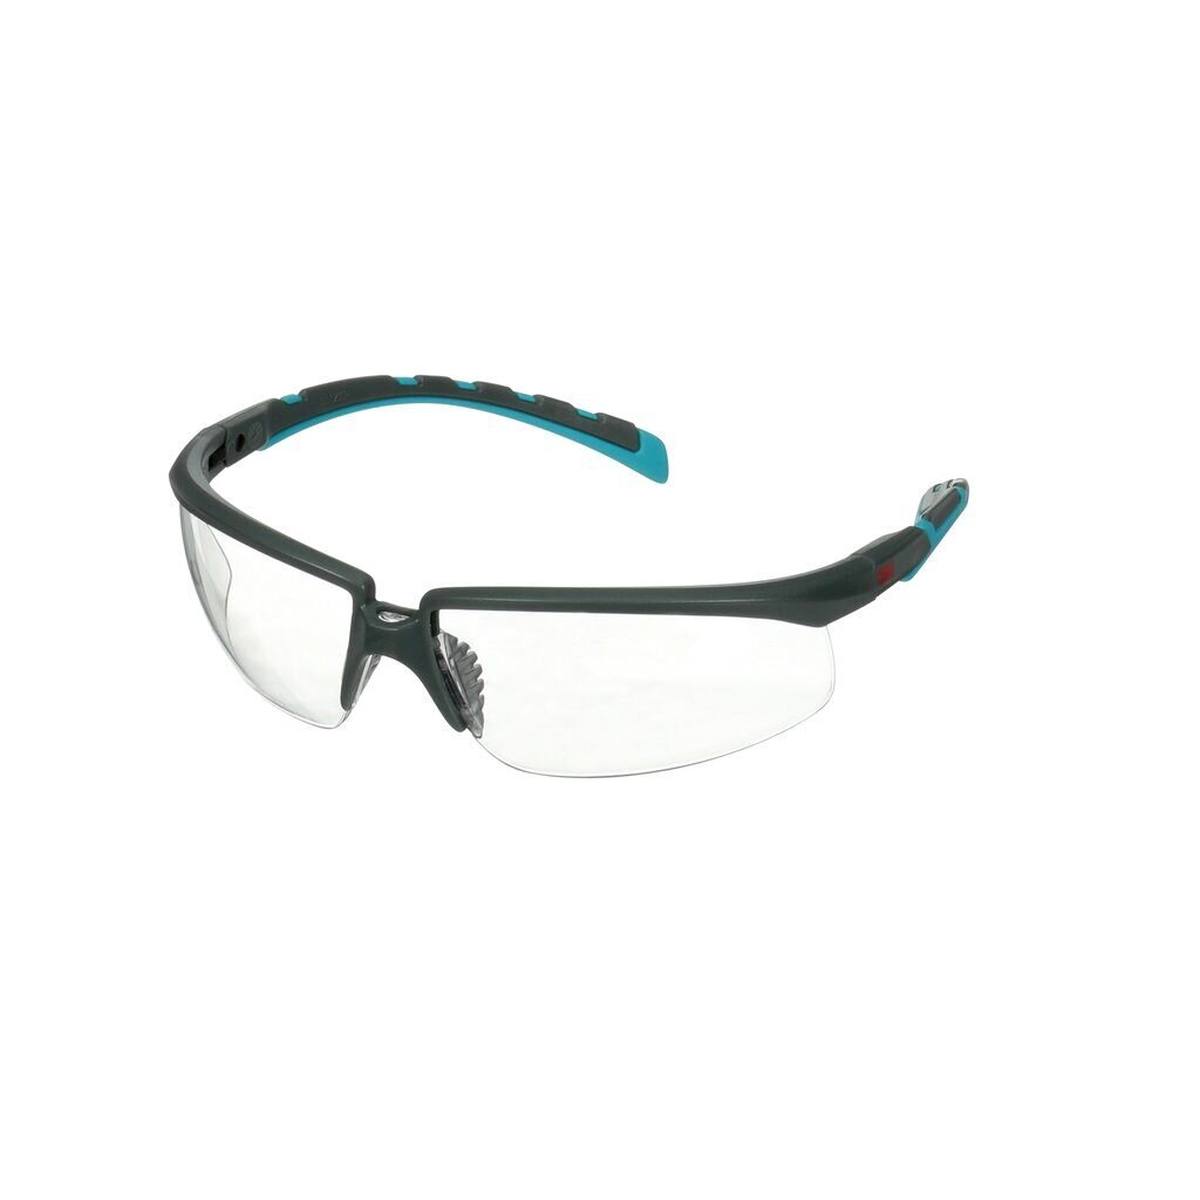 3M Solus 2000 safety spectacles, blue/grey temples, scratch-resistant+ (K), clear lens, angle-adjustable, S2001ASP-BLU-EU